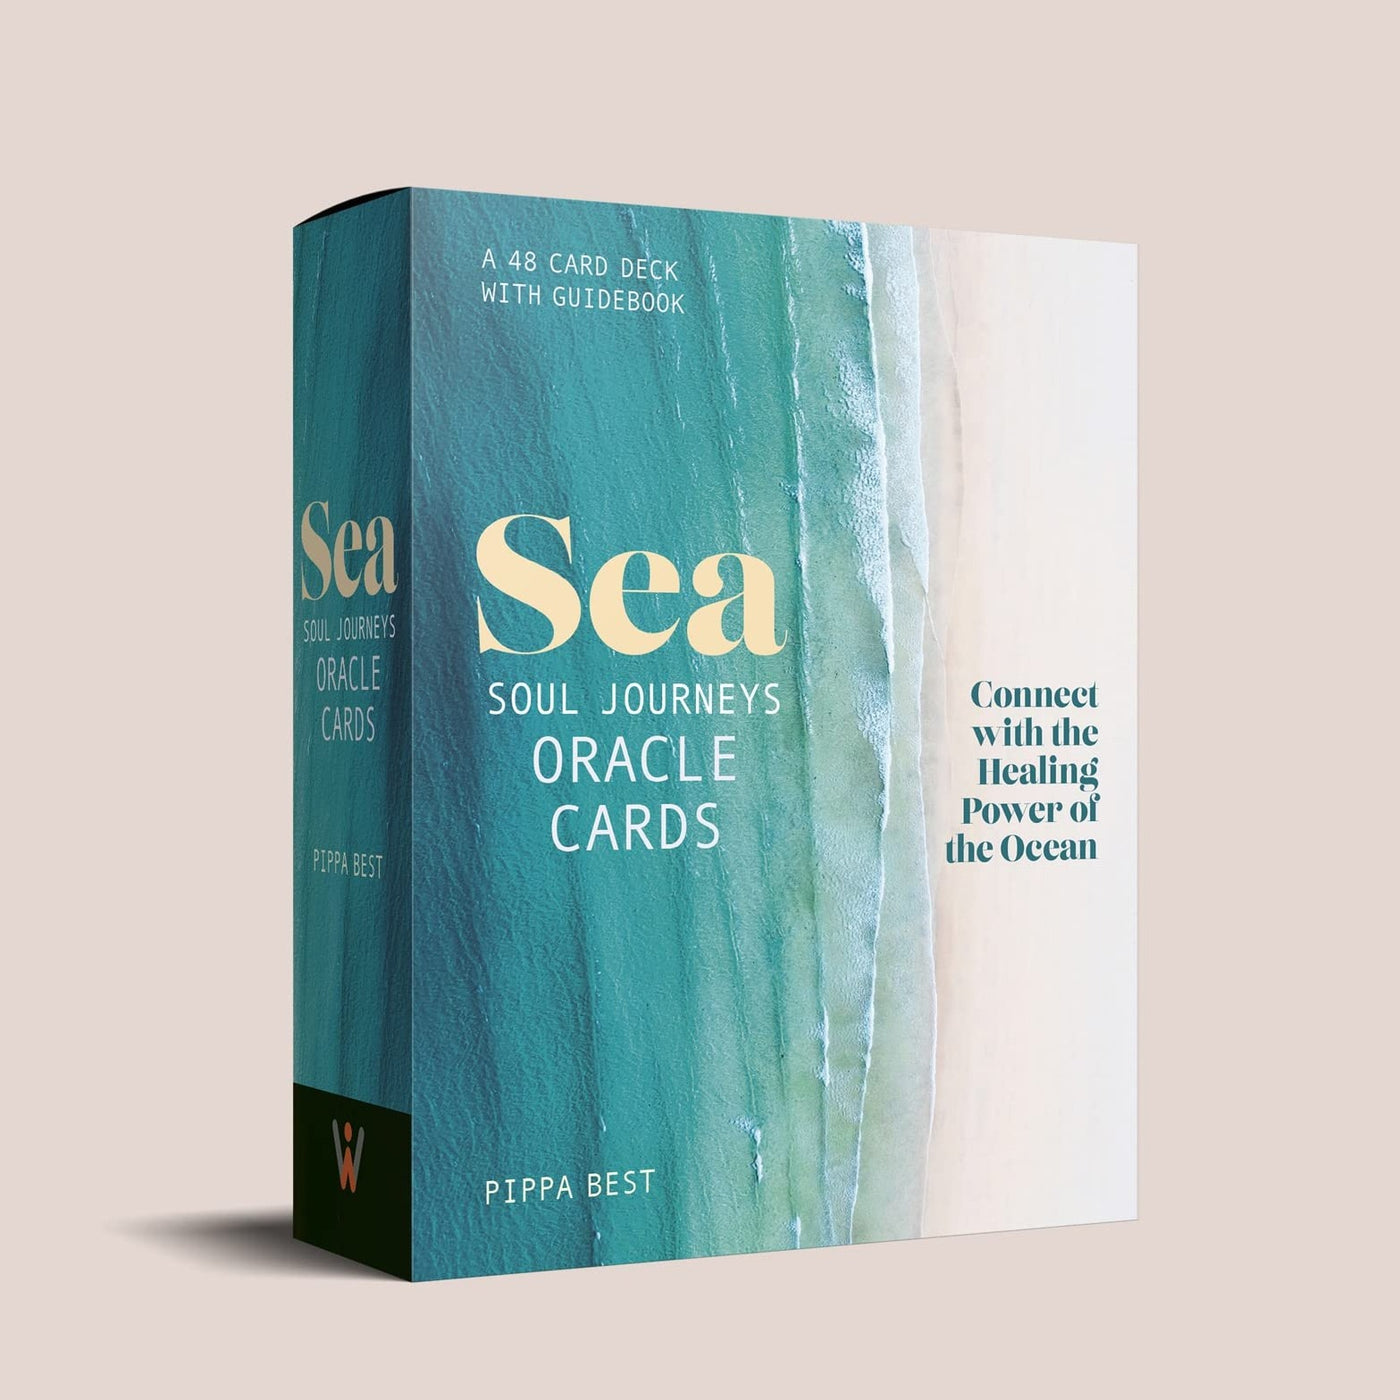 Sea Soul Journey Oracle Cards: Connect with the Healing Power of the Ocean Cards